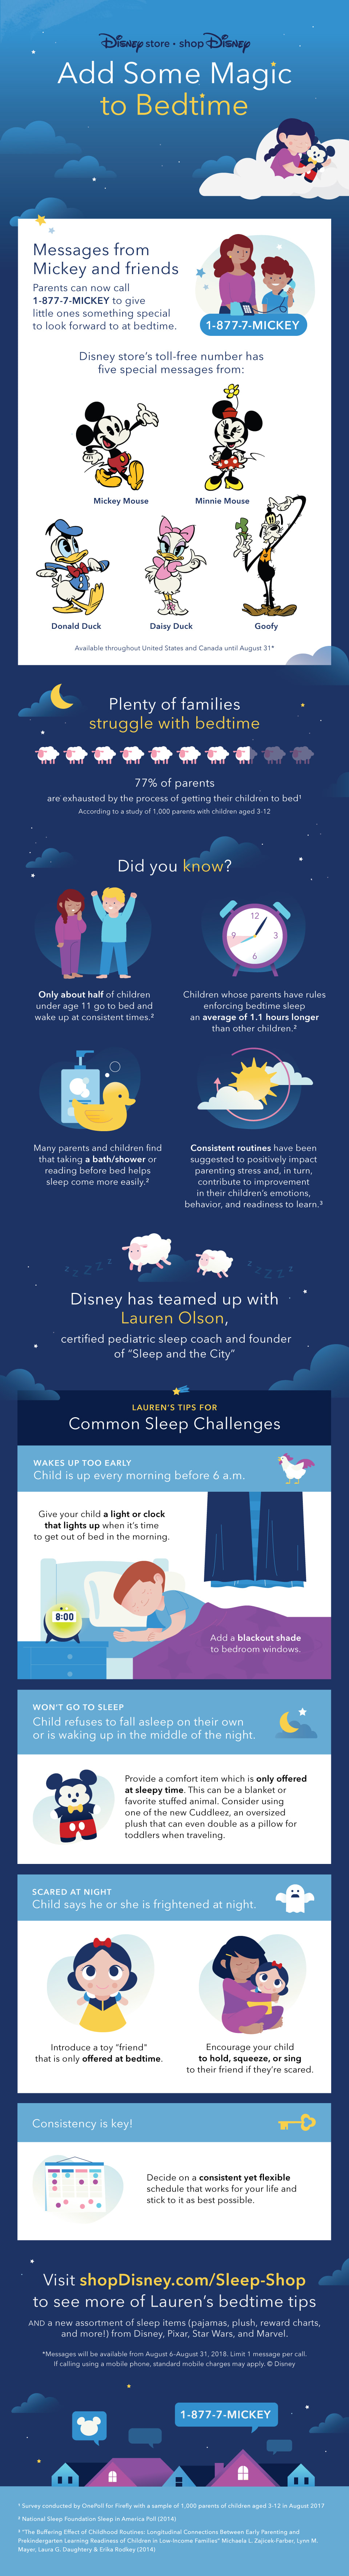 Disney Characters Can Wish Your Kids A Good Night